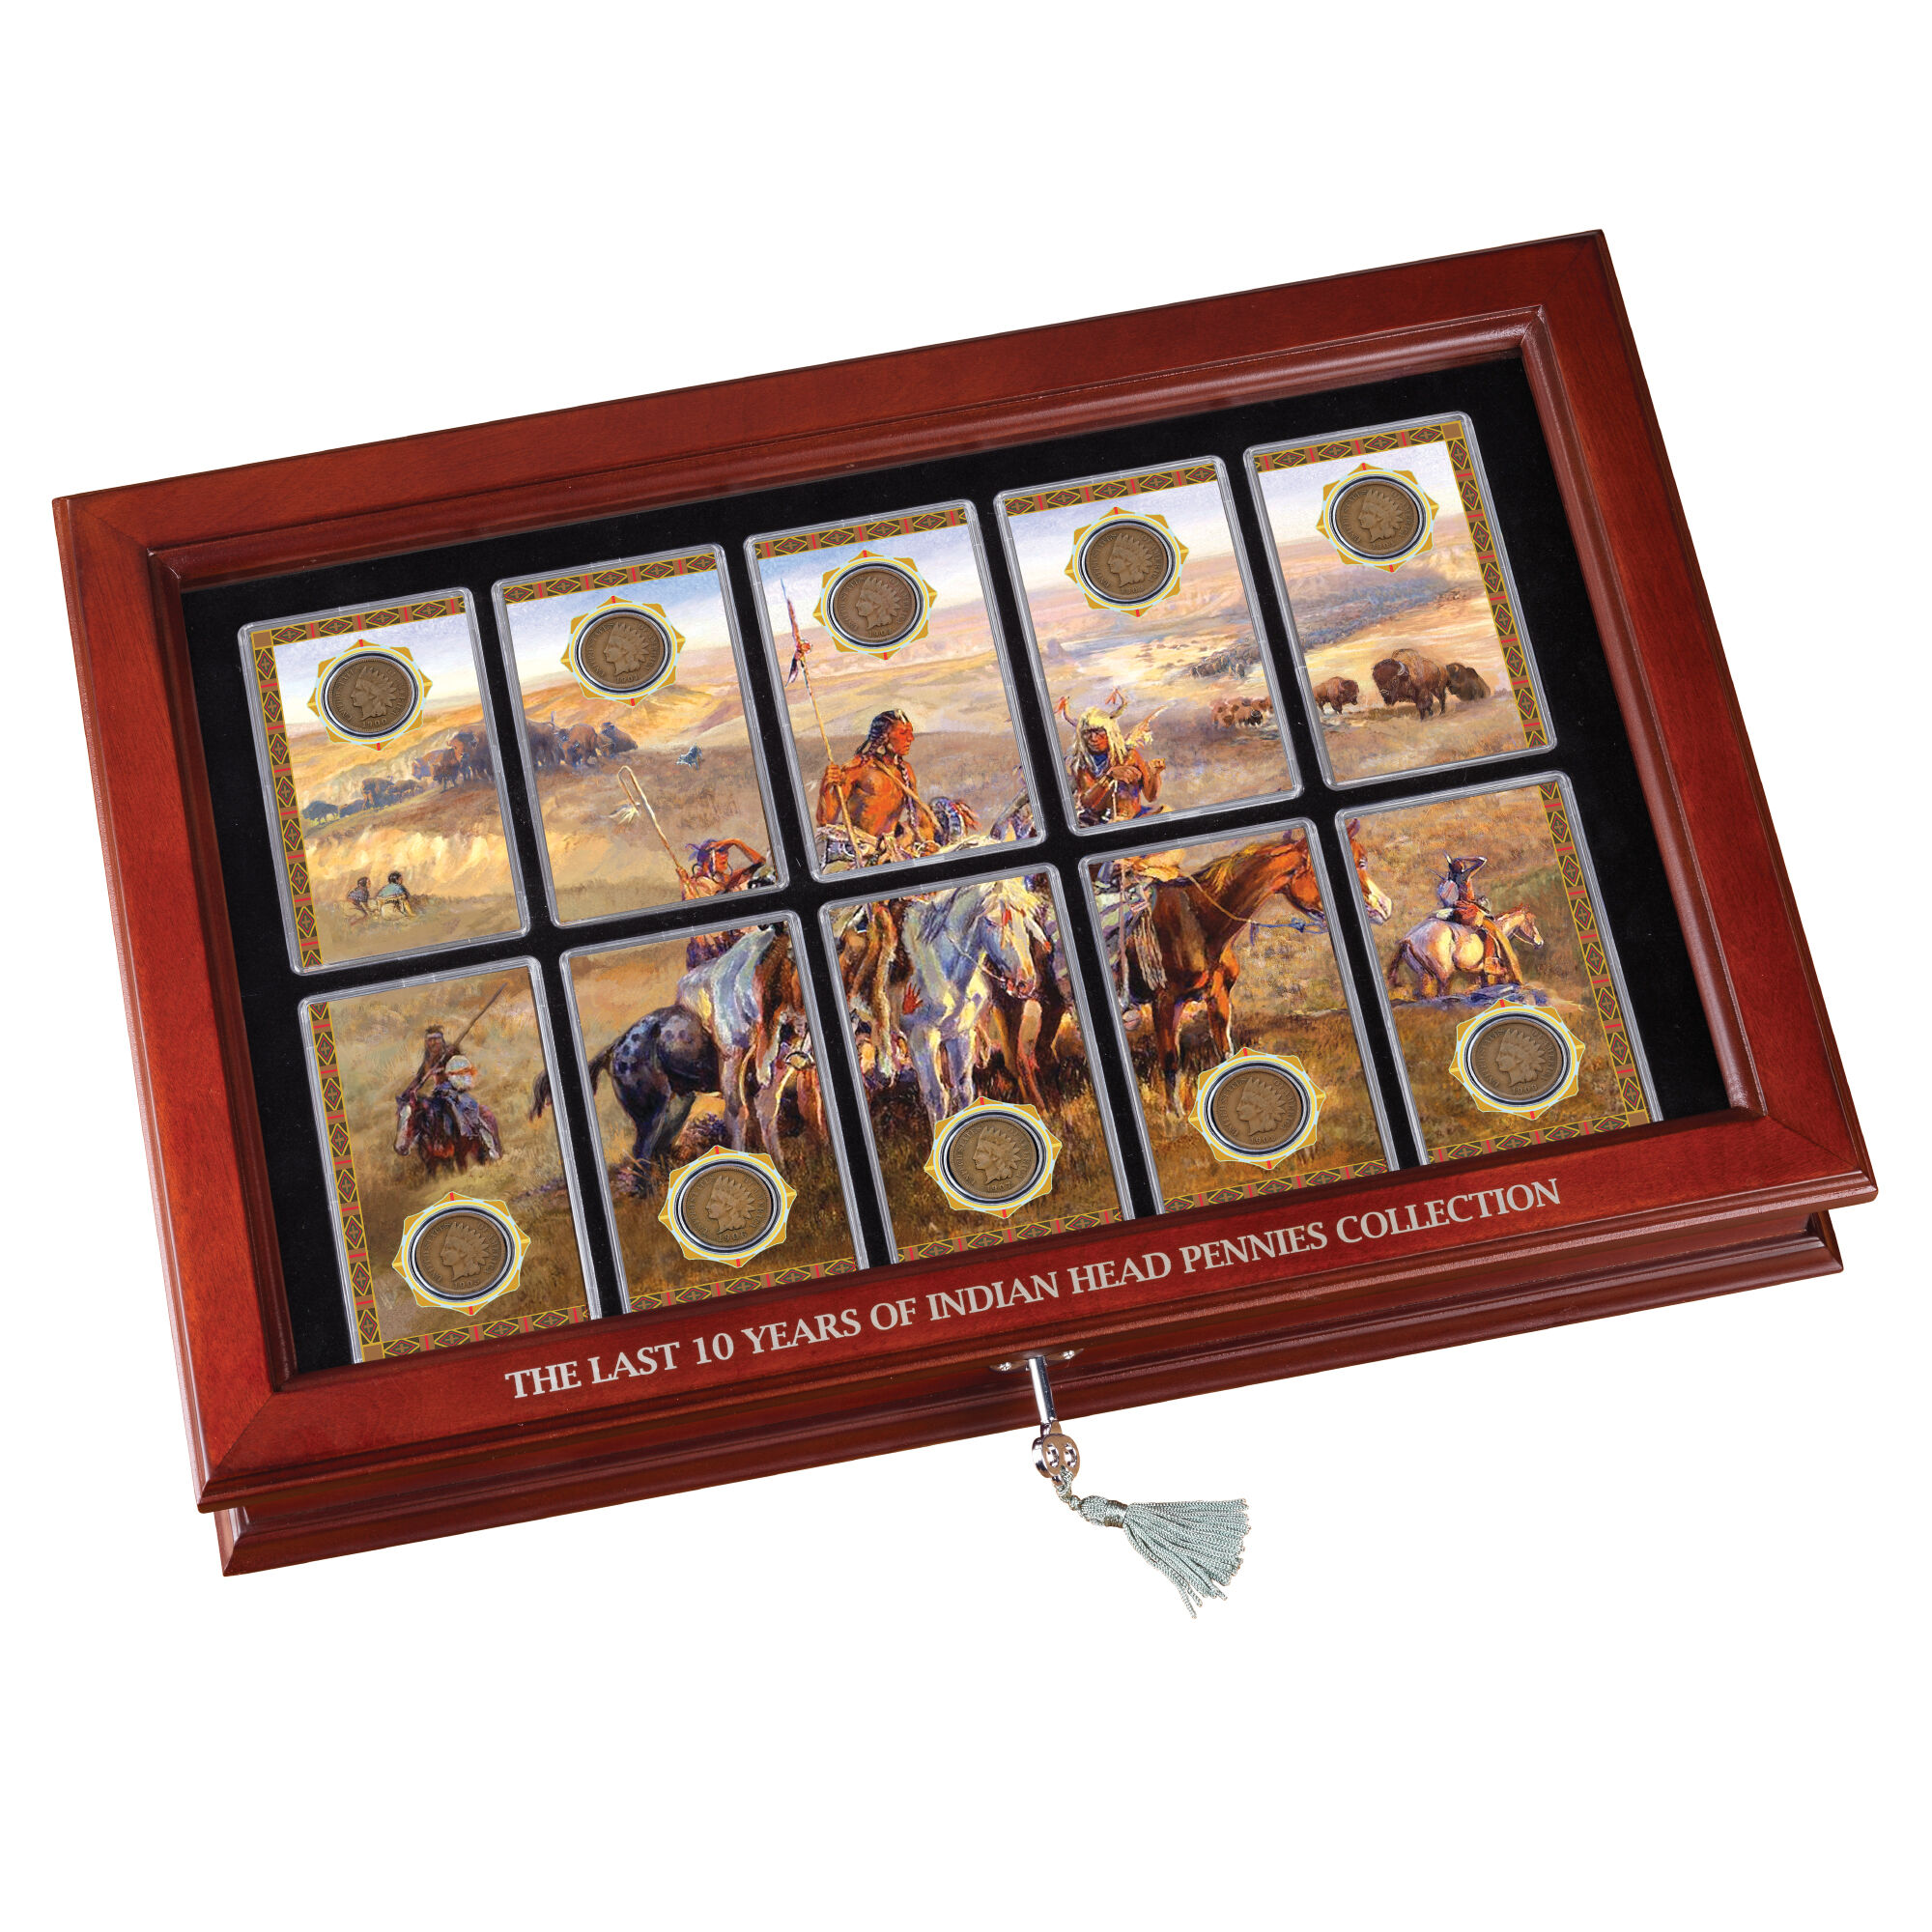 The Last 10 Years of Indian Head Pennies Collection 10404 0027 c displayclosed